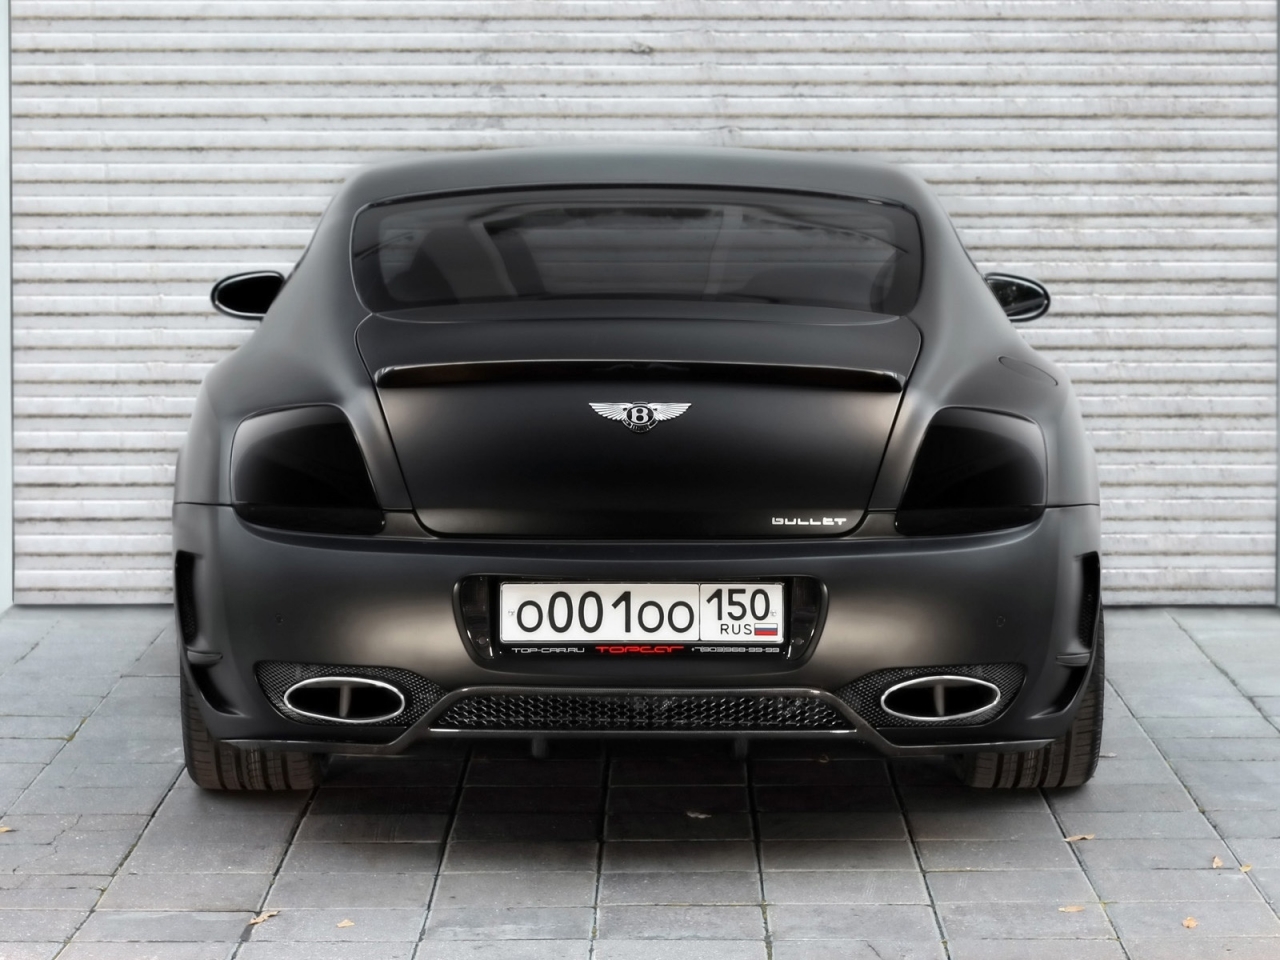 2010 Bentley Continental GT Bullet Rear for 1280 x 960 resolution